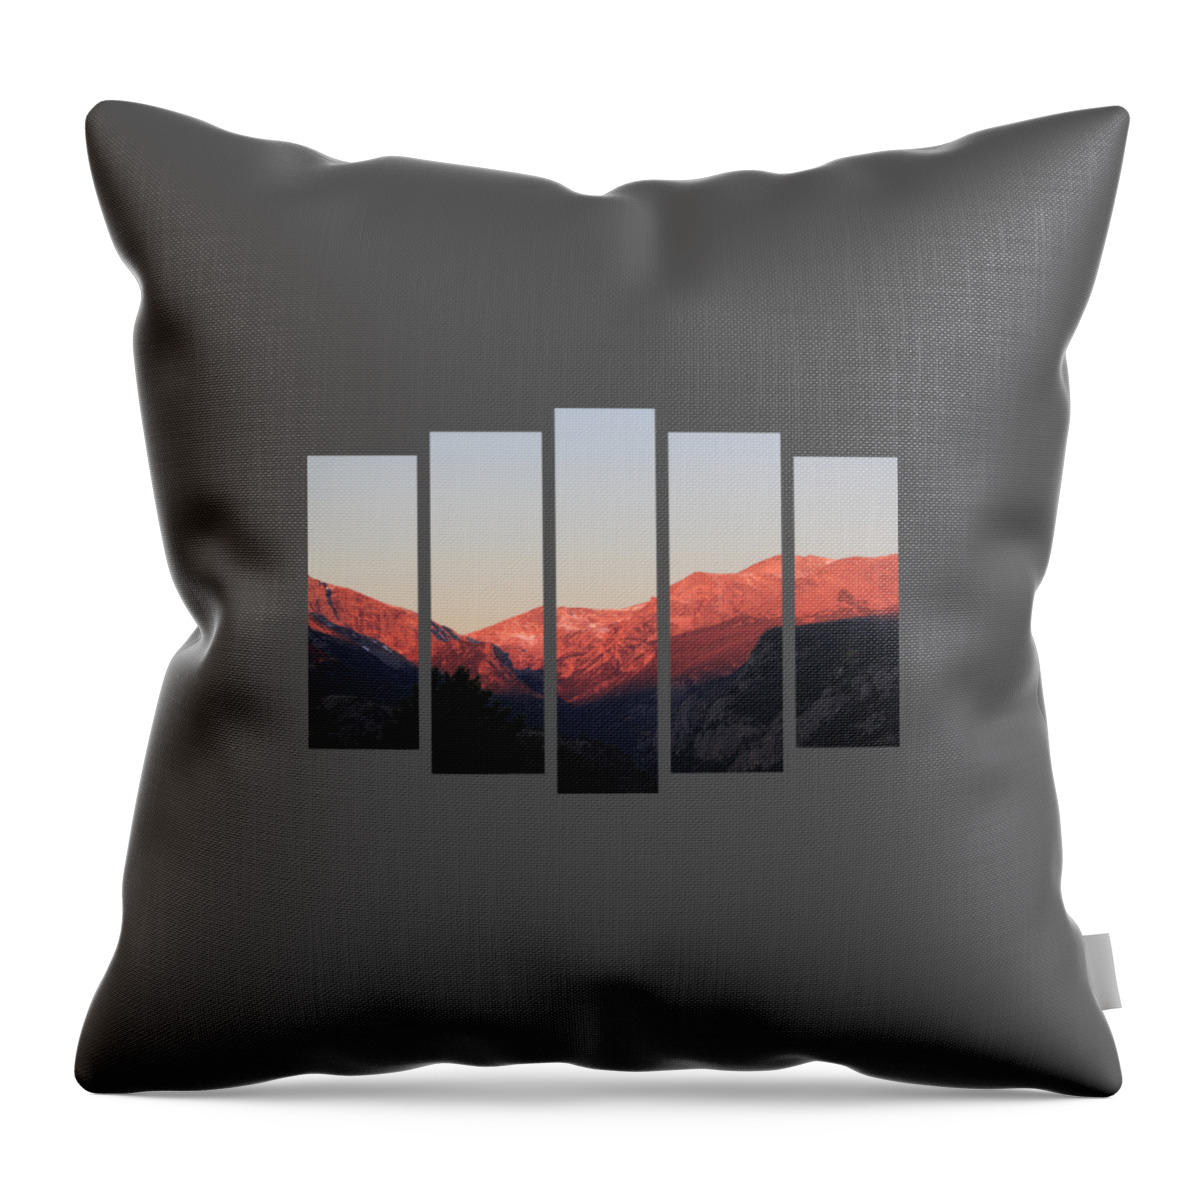 Set 41 Throw Pillow featuring the photograph Set 41 by Shane Bechler